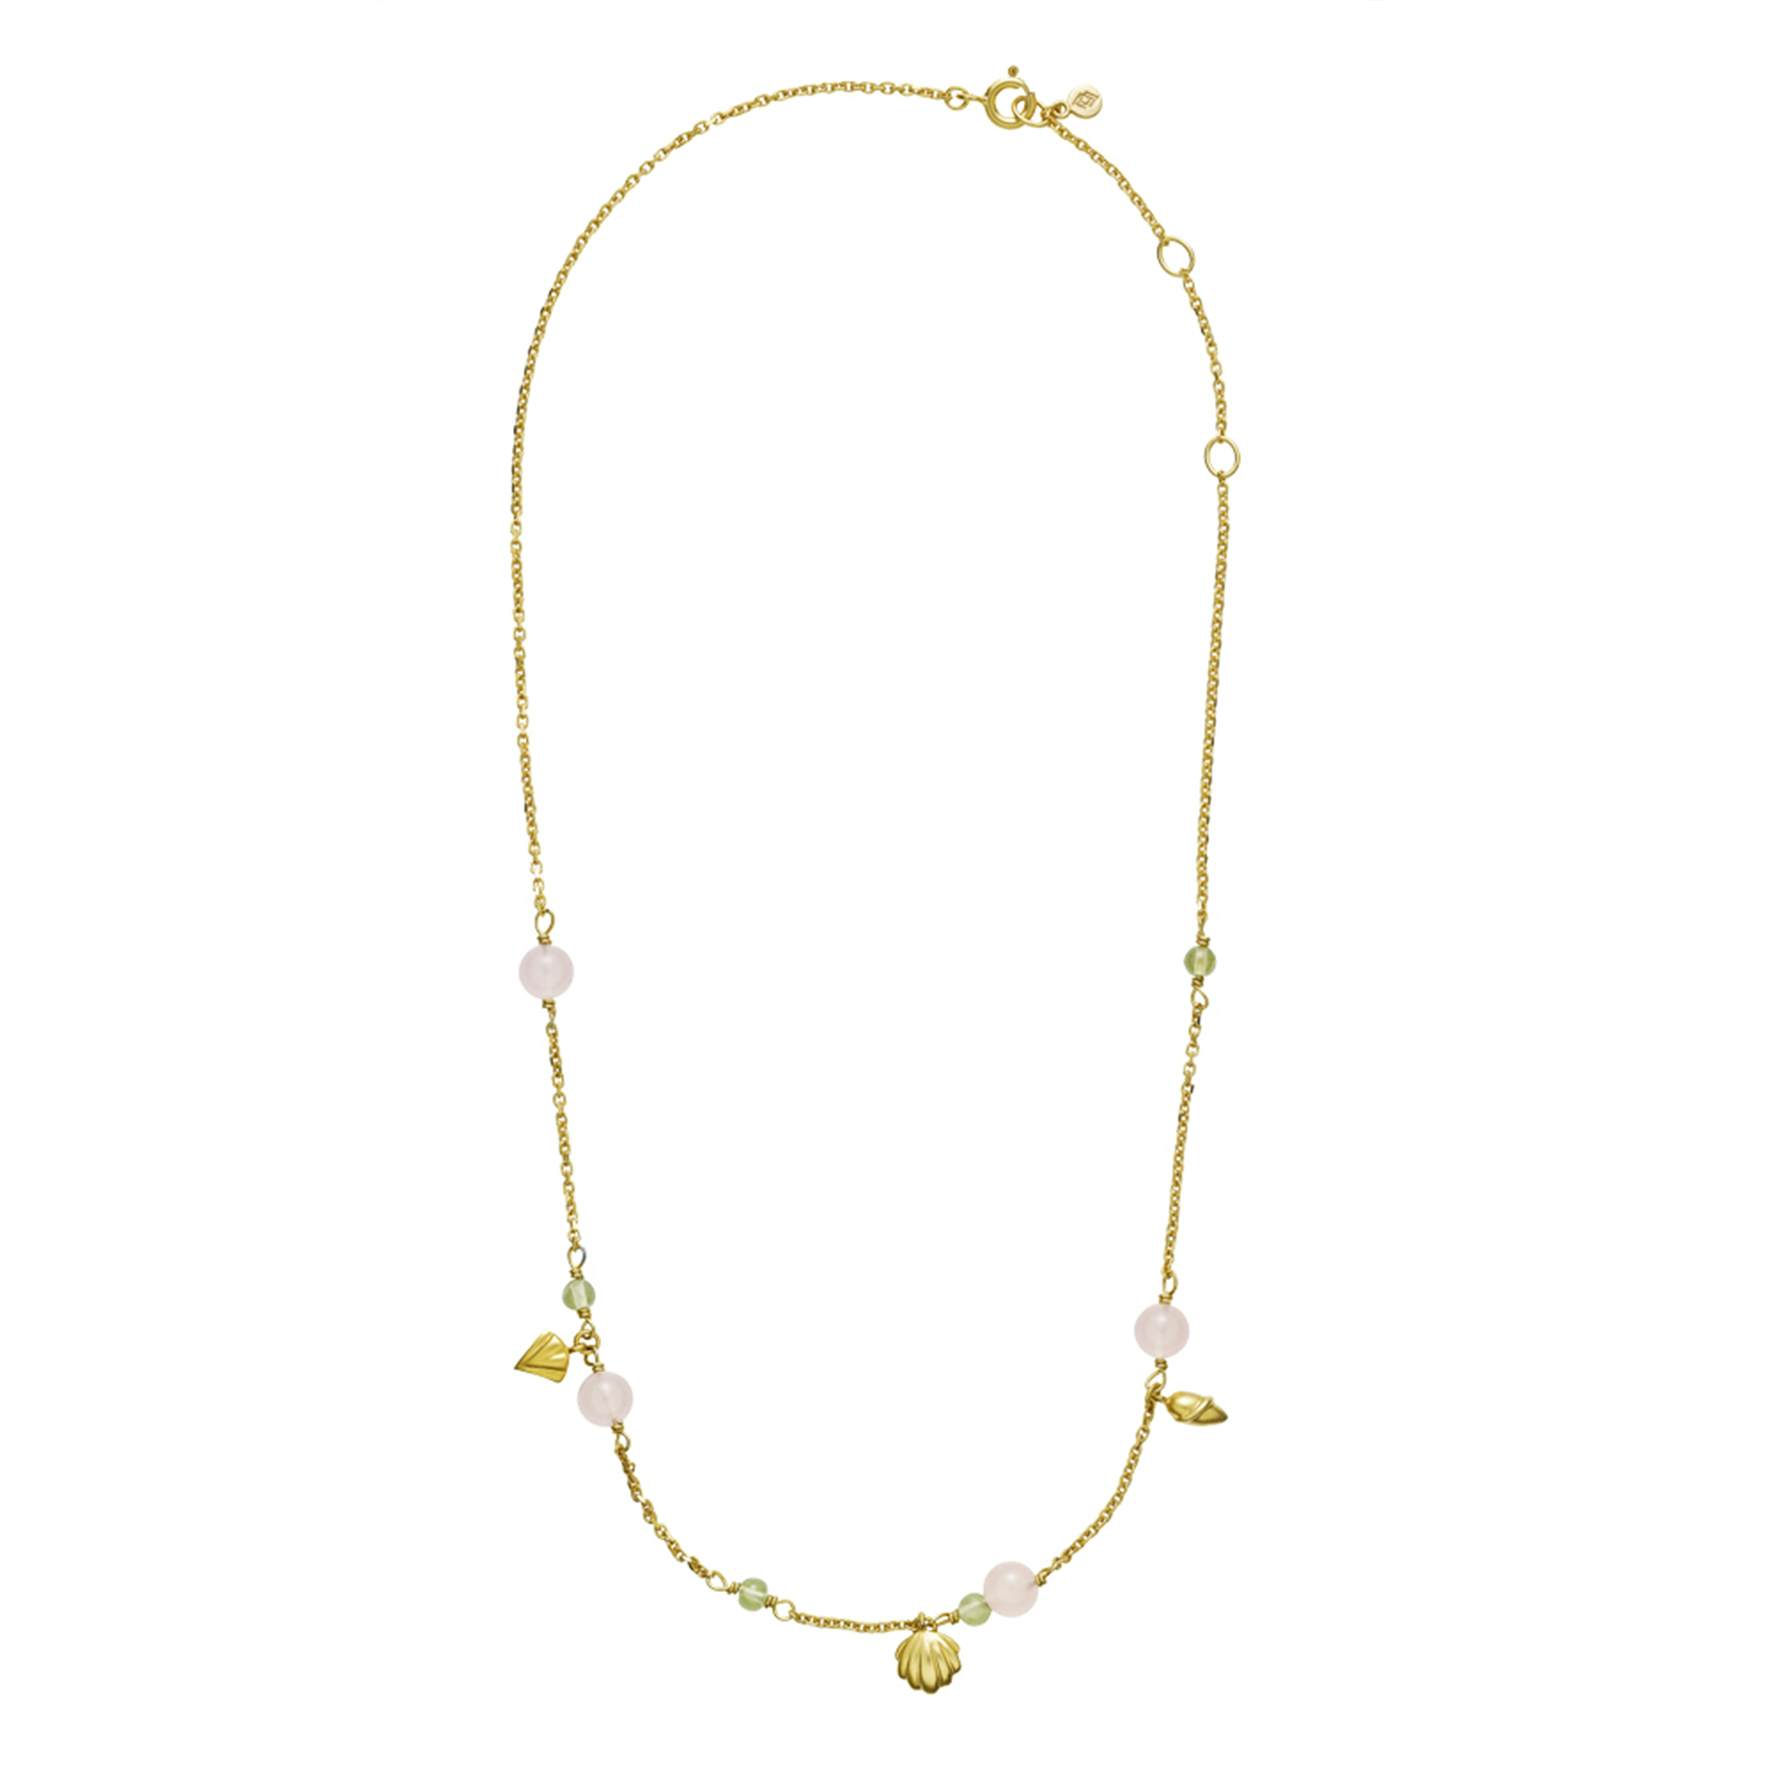 Isabella Pink/Green Necklace from Izabel Camille in Goldplated-Silver Sterling 925